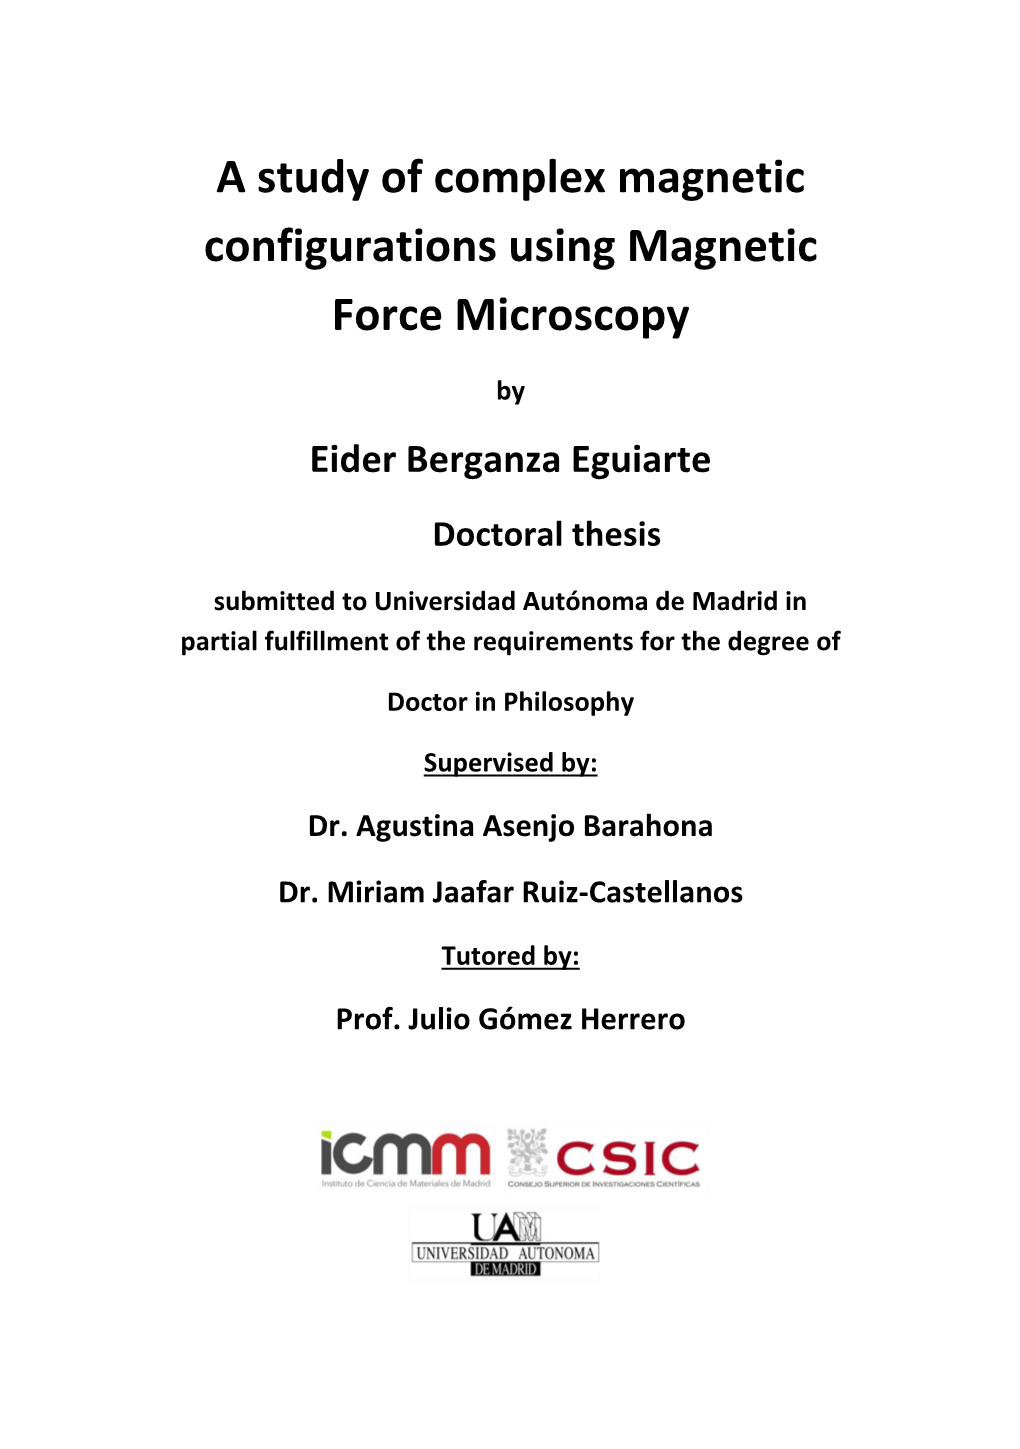 A Study of Complex Magnetic Configurations Using Magnetic Force Microscopy